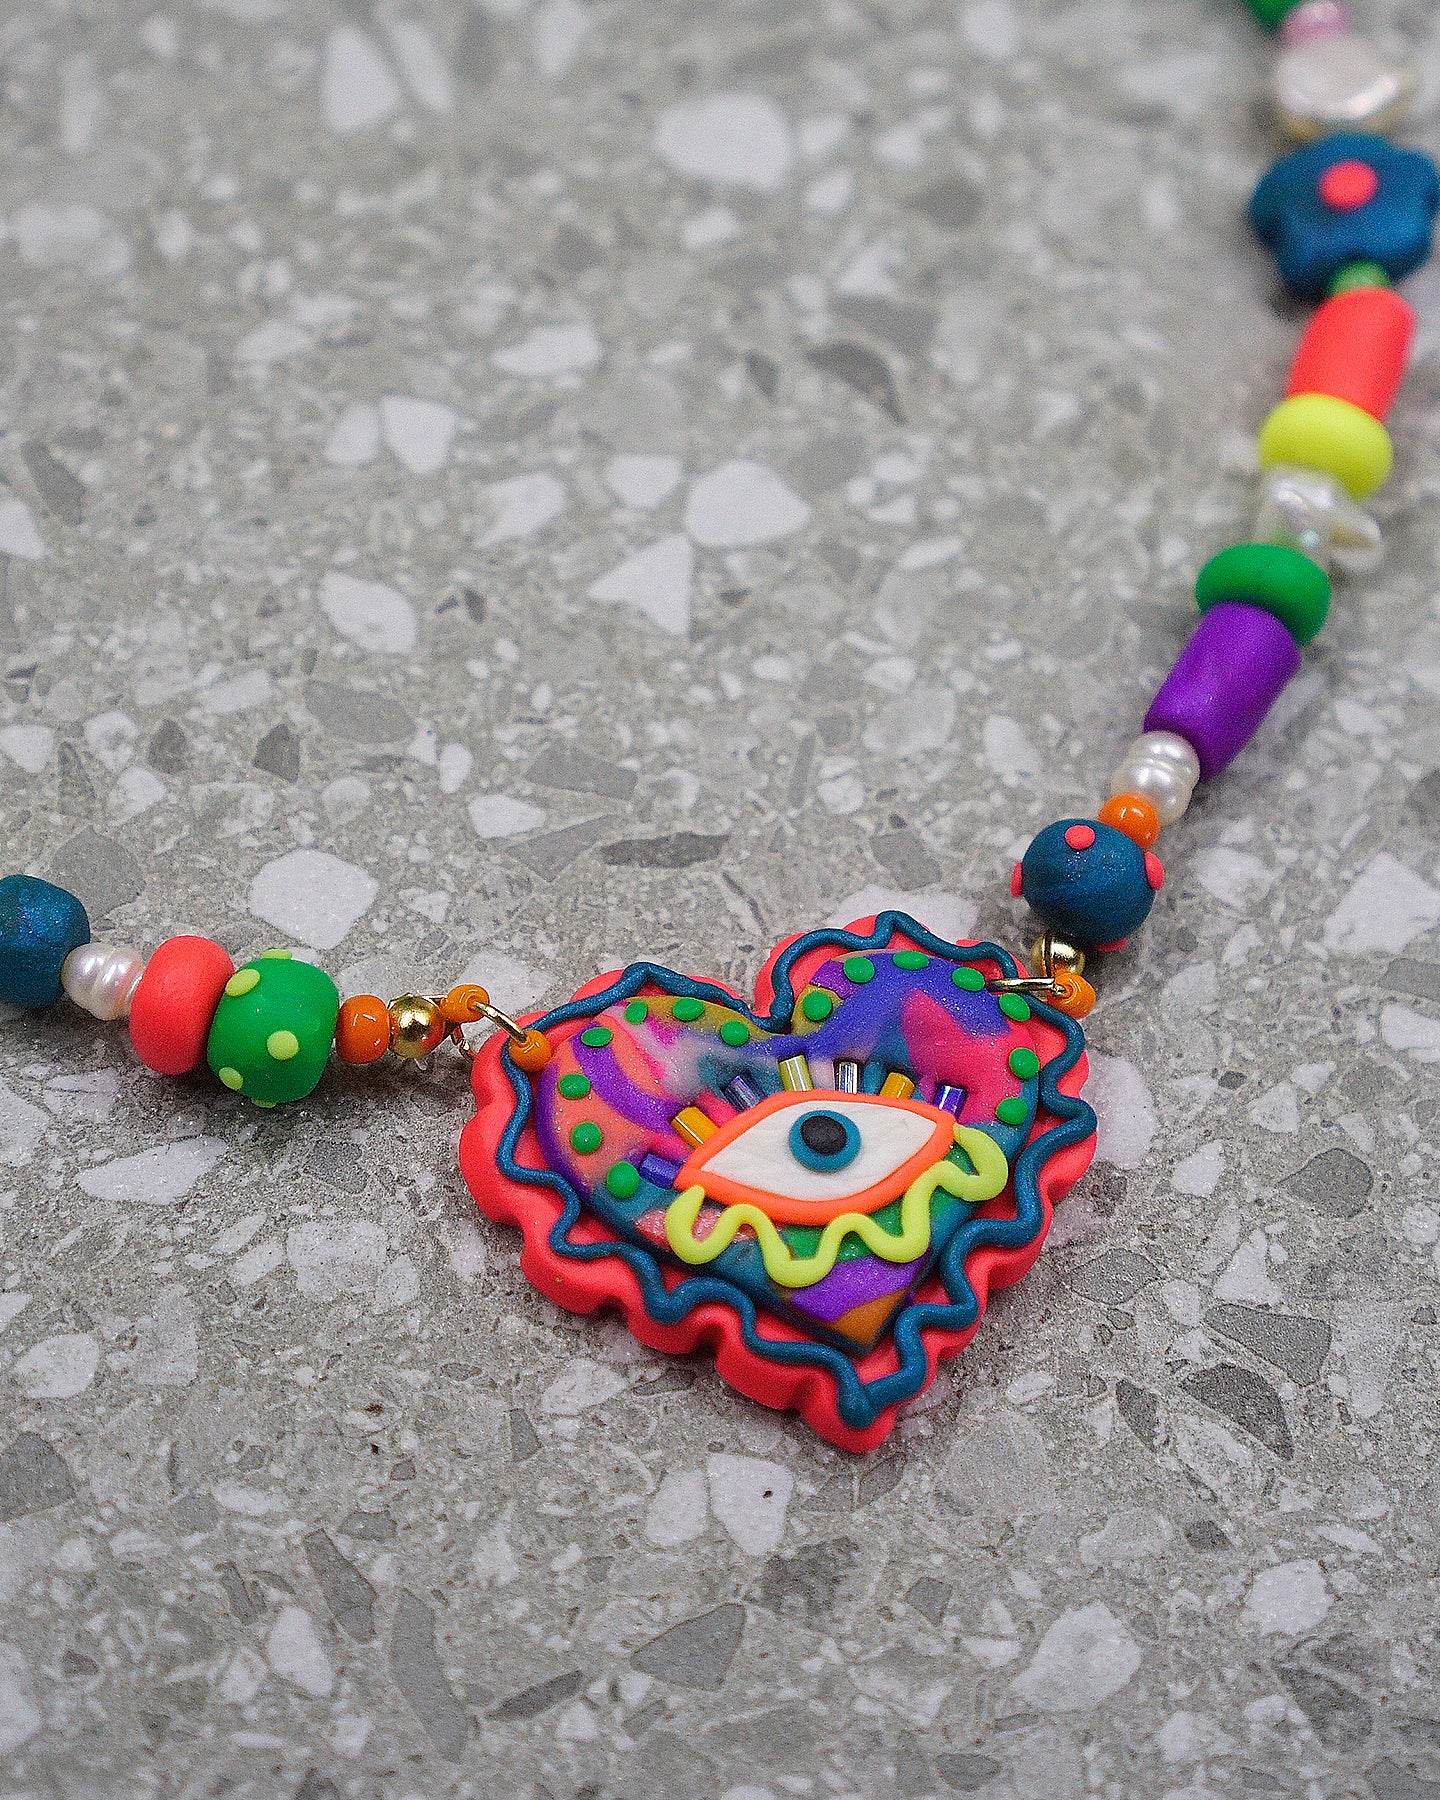 Eye See You Necklace in Neon Pop